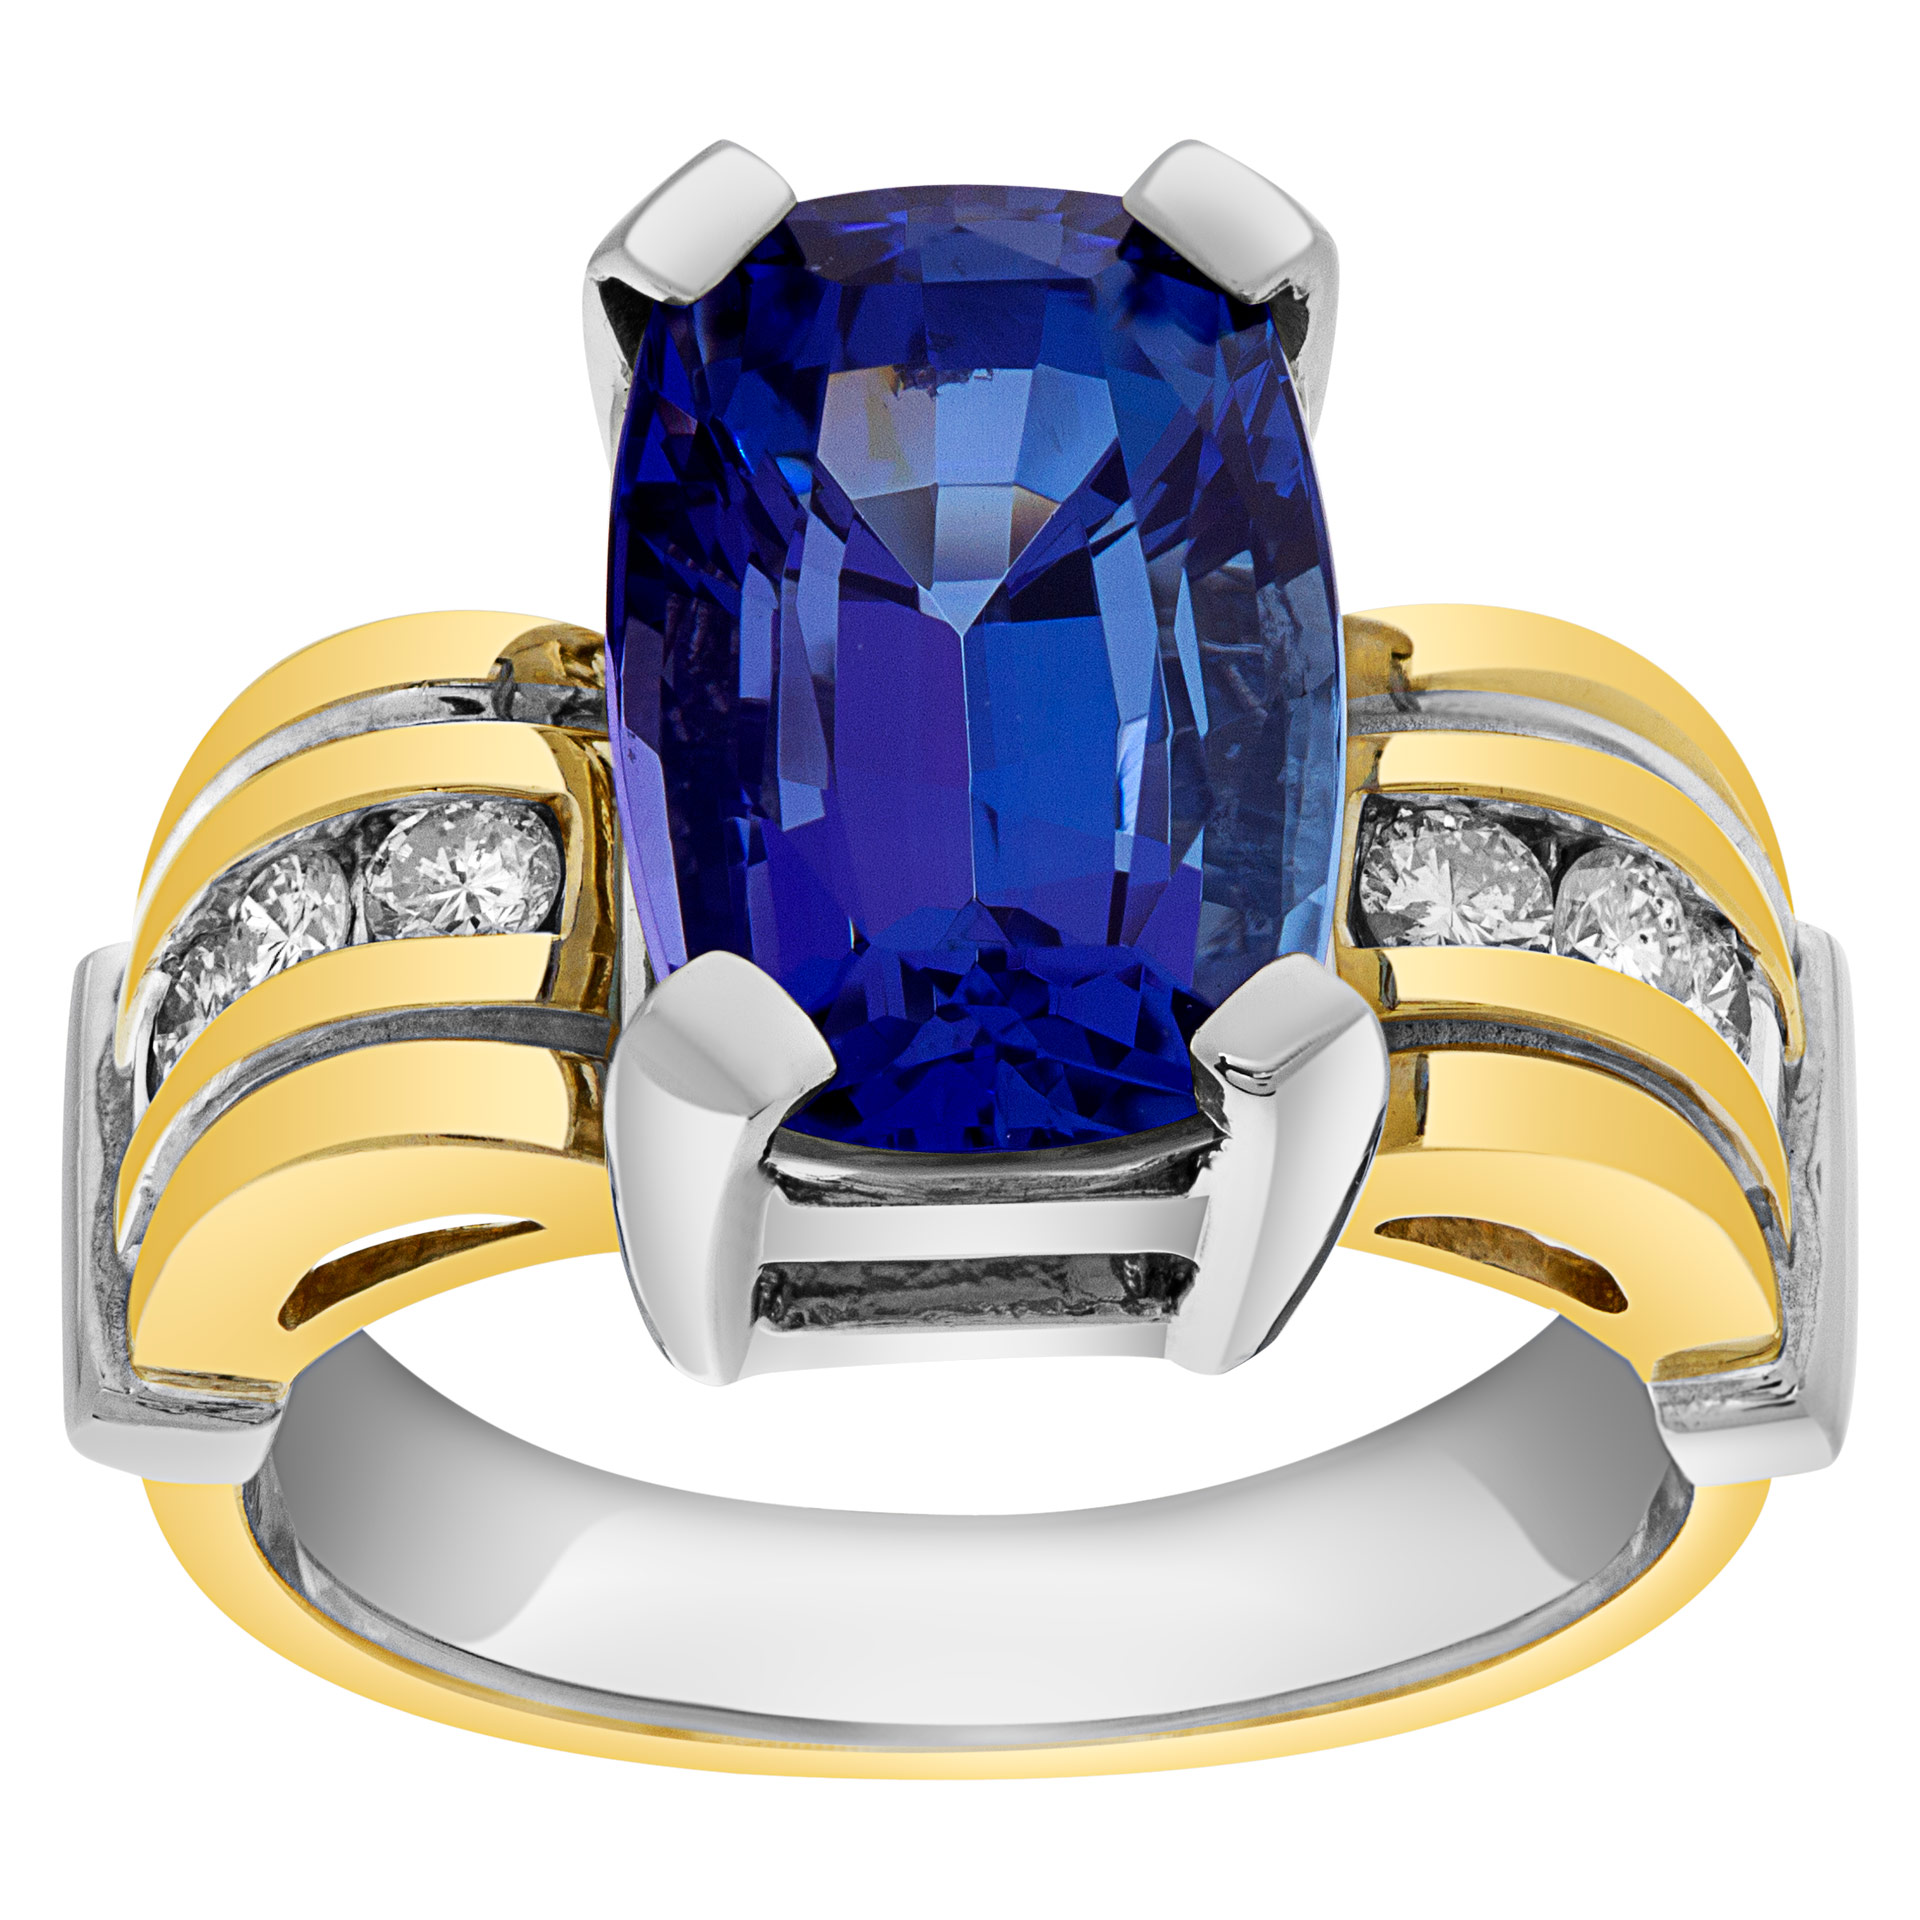 AGL certified 7.34 carats cushion cut tanzanite & round brilliant cut diamonds ring set in 14k white and yellow gold (Stones)